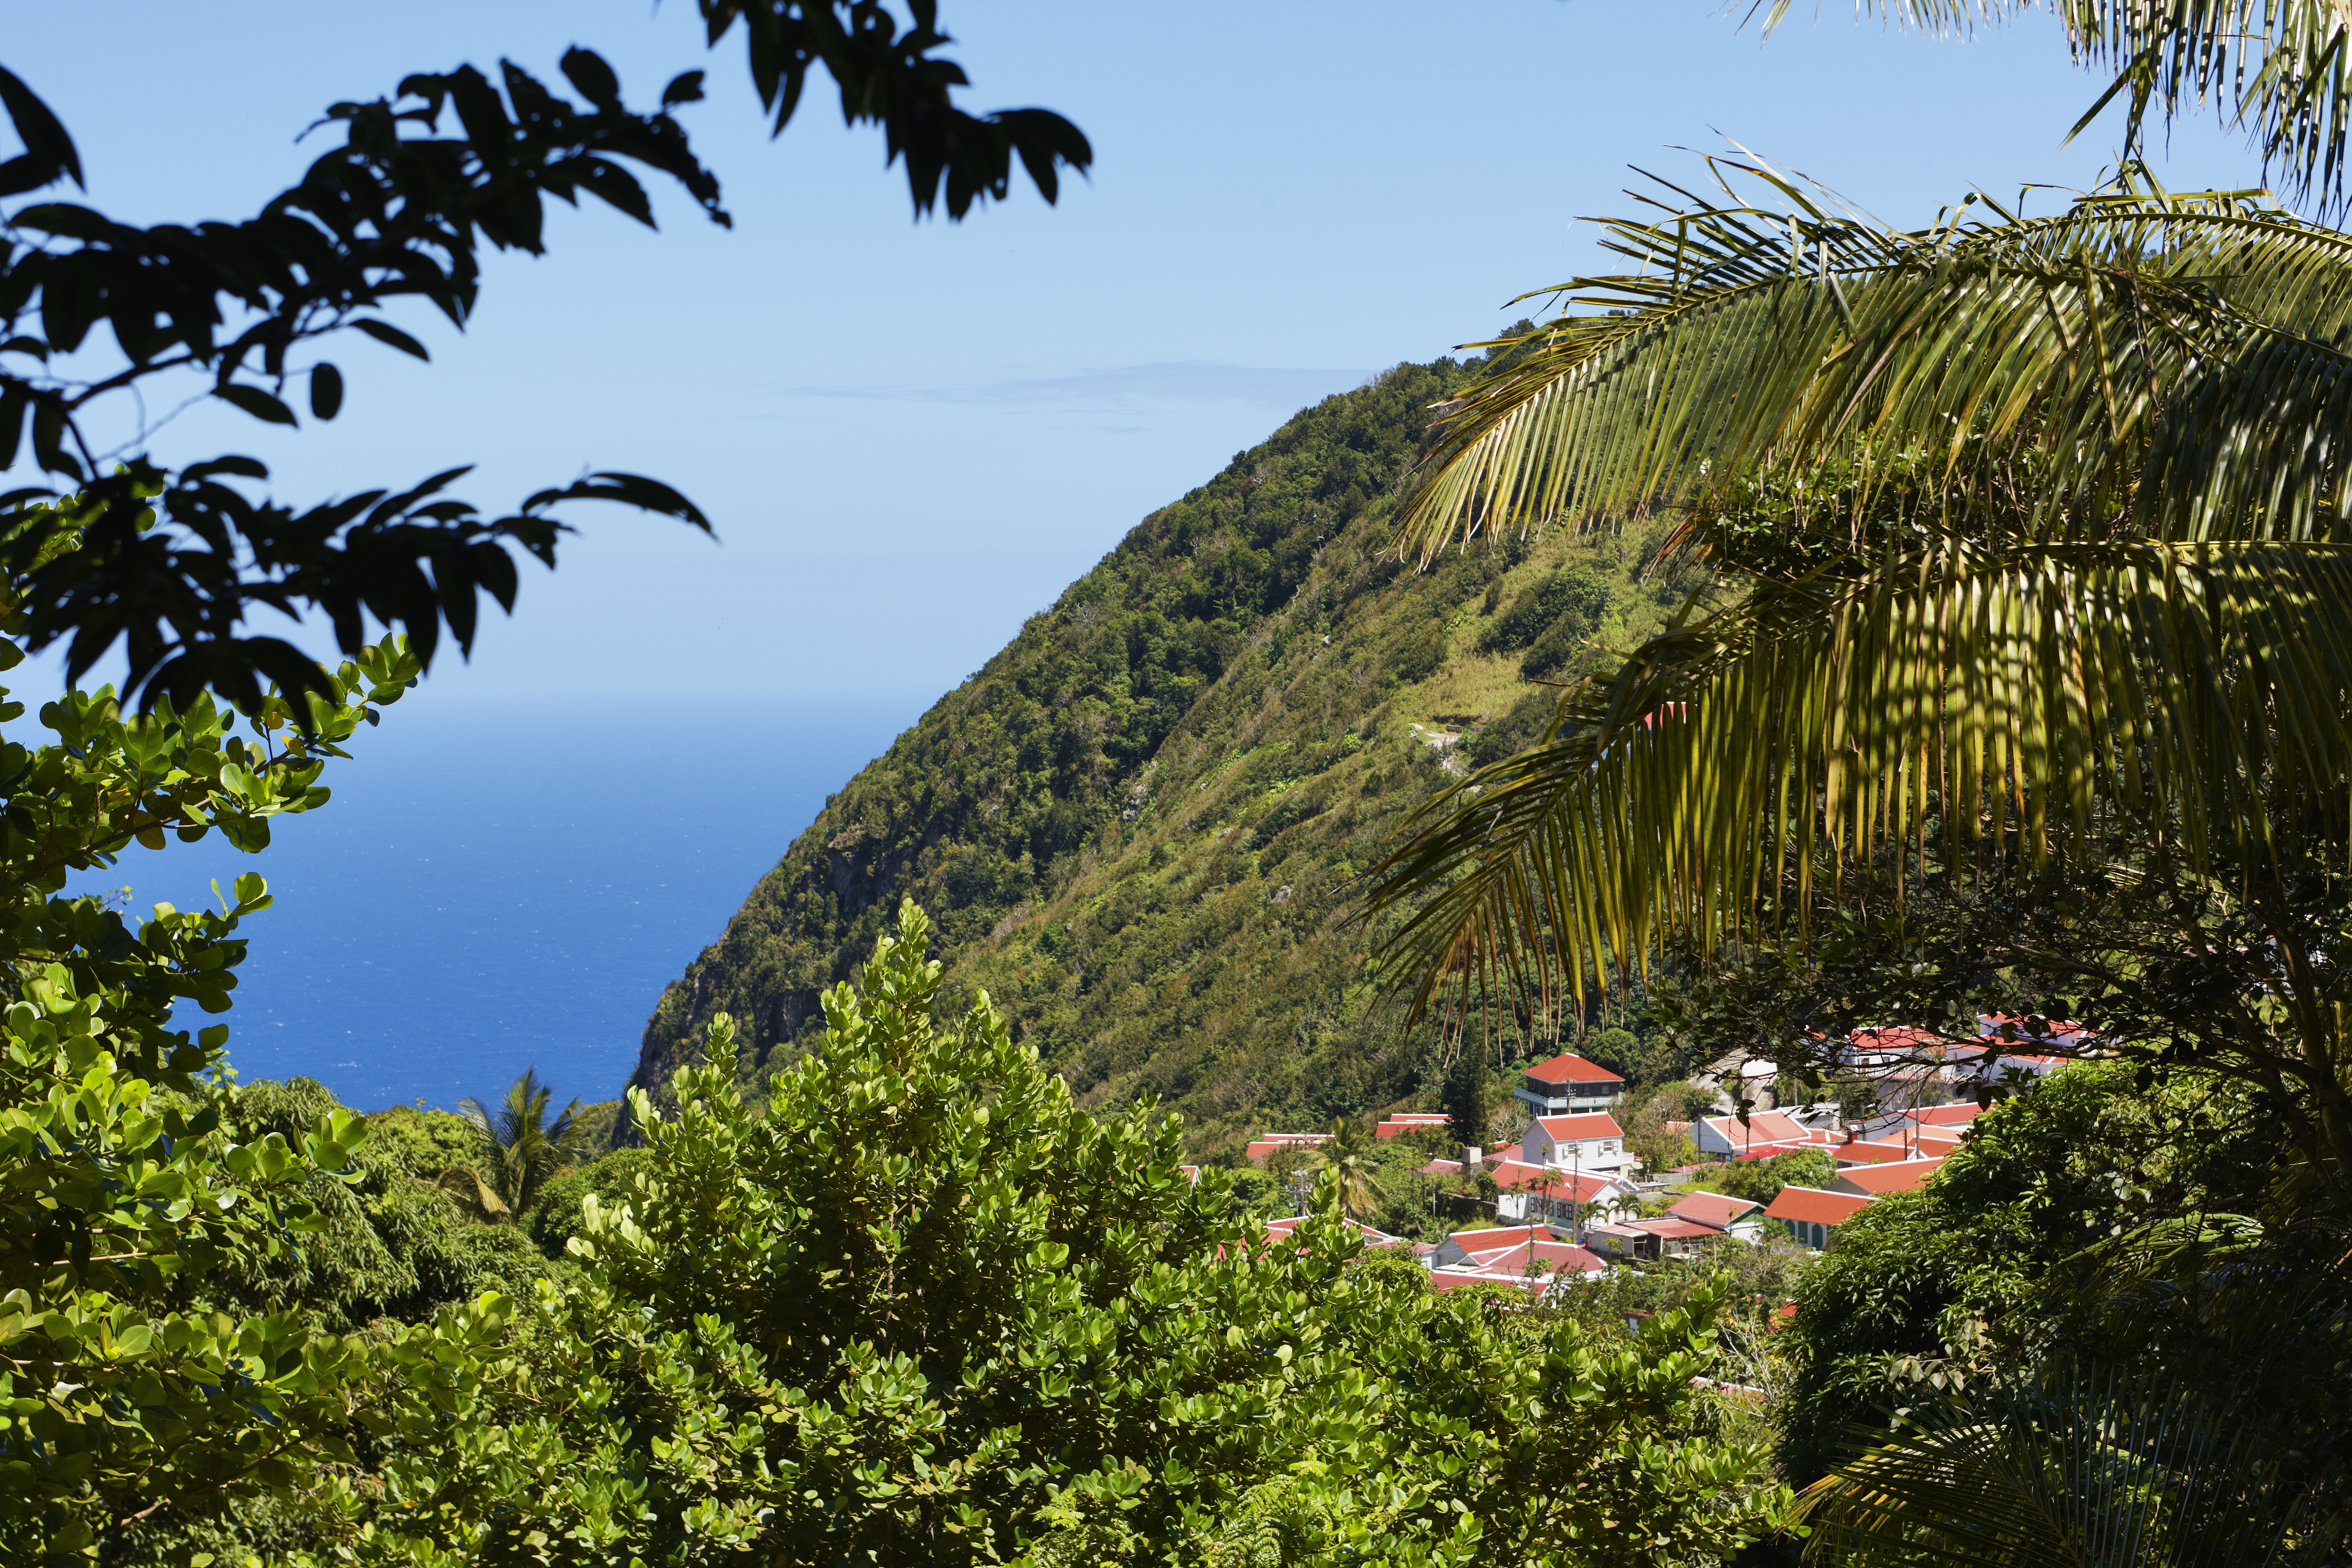 A view of the Caribbean island Saba